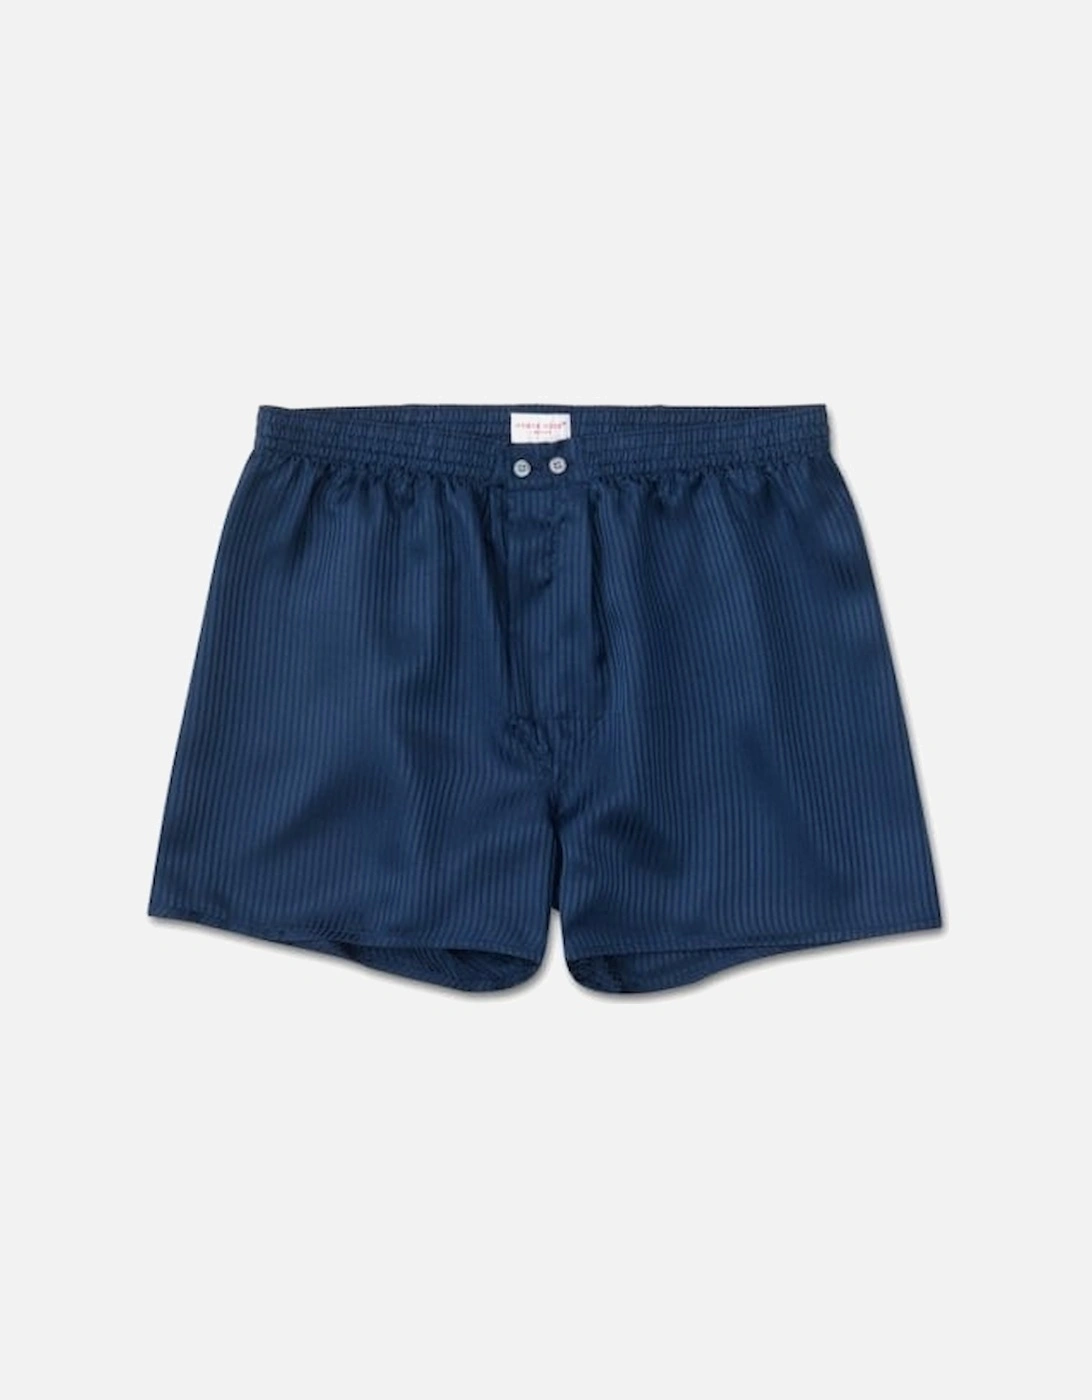 Woburn Classic-Fit Silk Boxer Shorts, Navy, 7 of 6